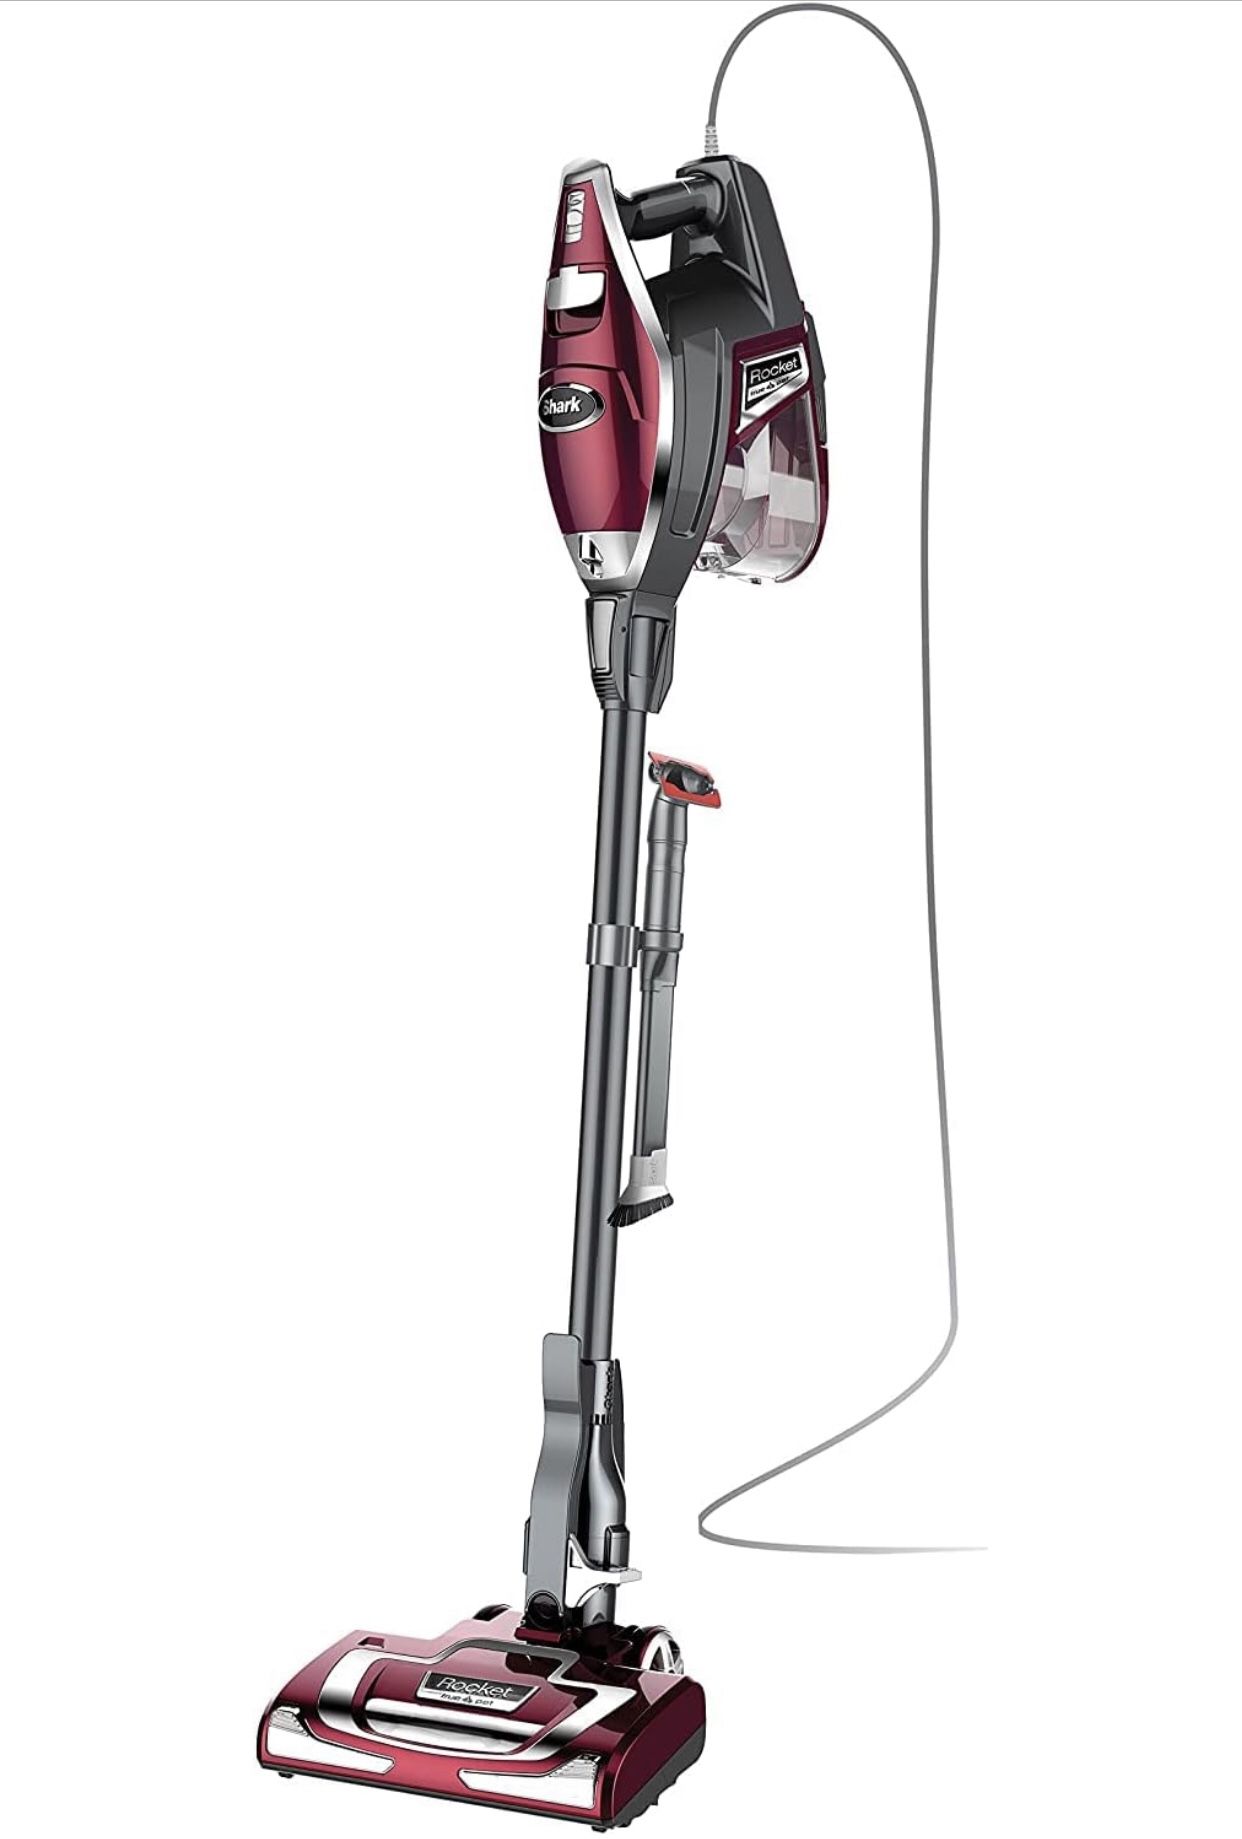 Shark HV322 Rocket Deluxe Pro Corded Stick Vacuum with LED Headlights, XL Dust Cup, Lightweight, Perfect for Pet Hair Pickup, Converts to a Hand Vacuu